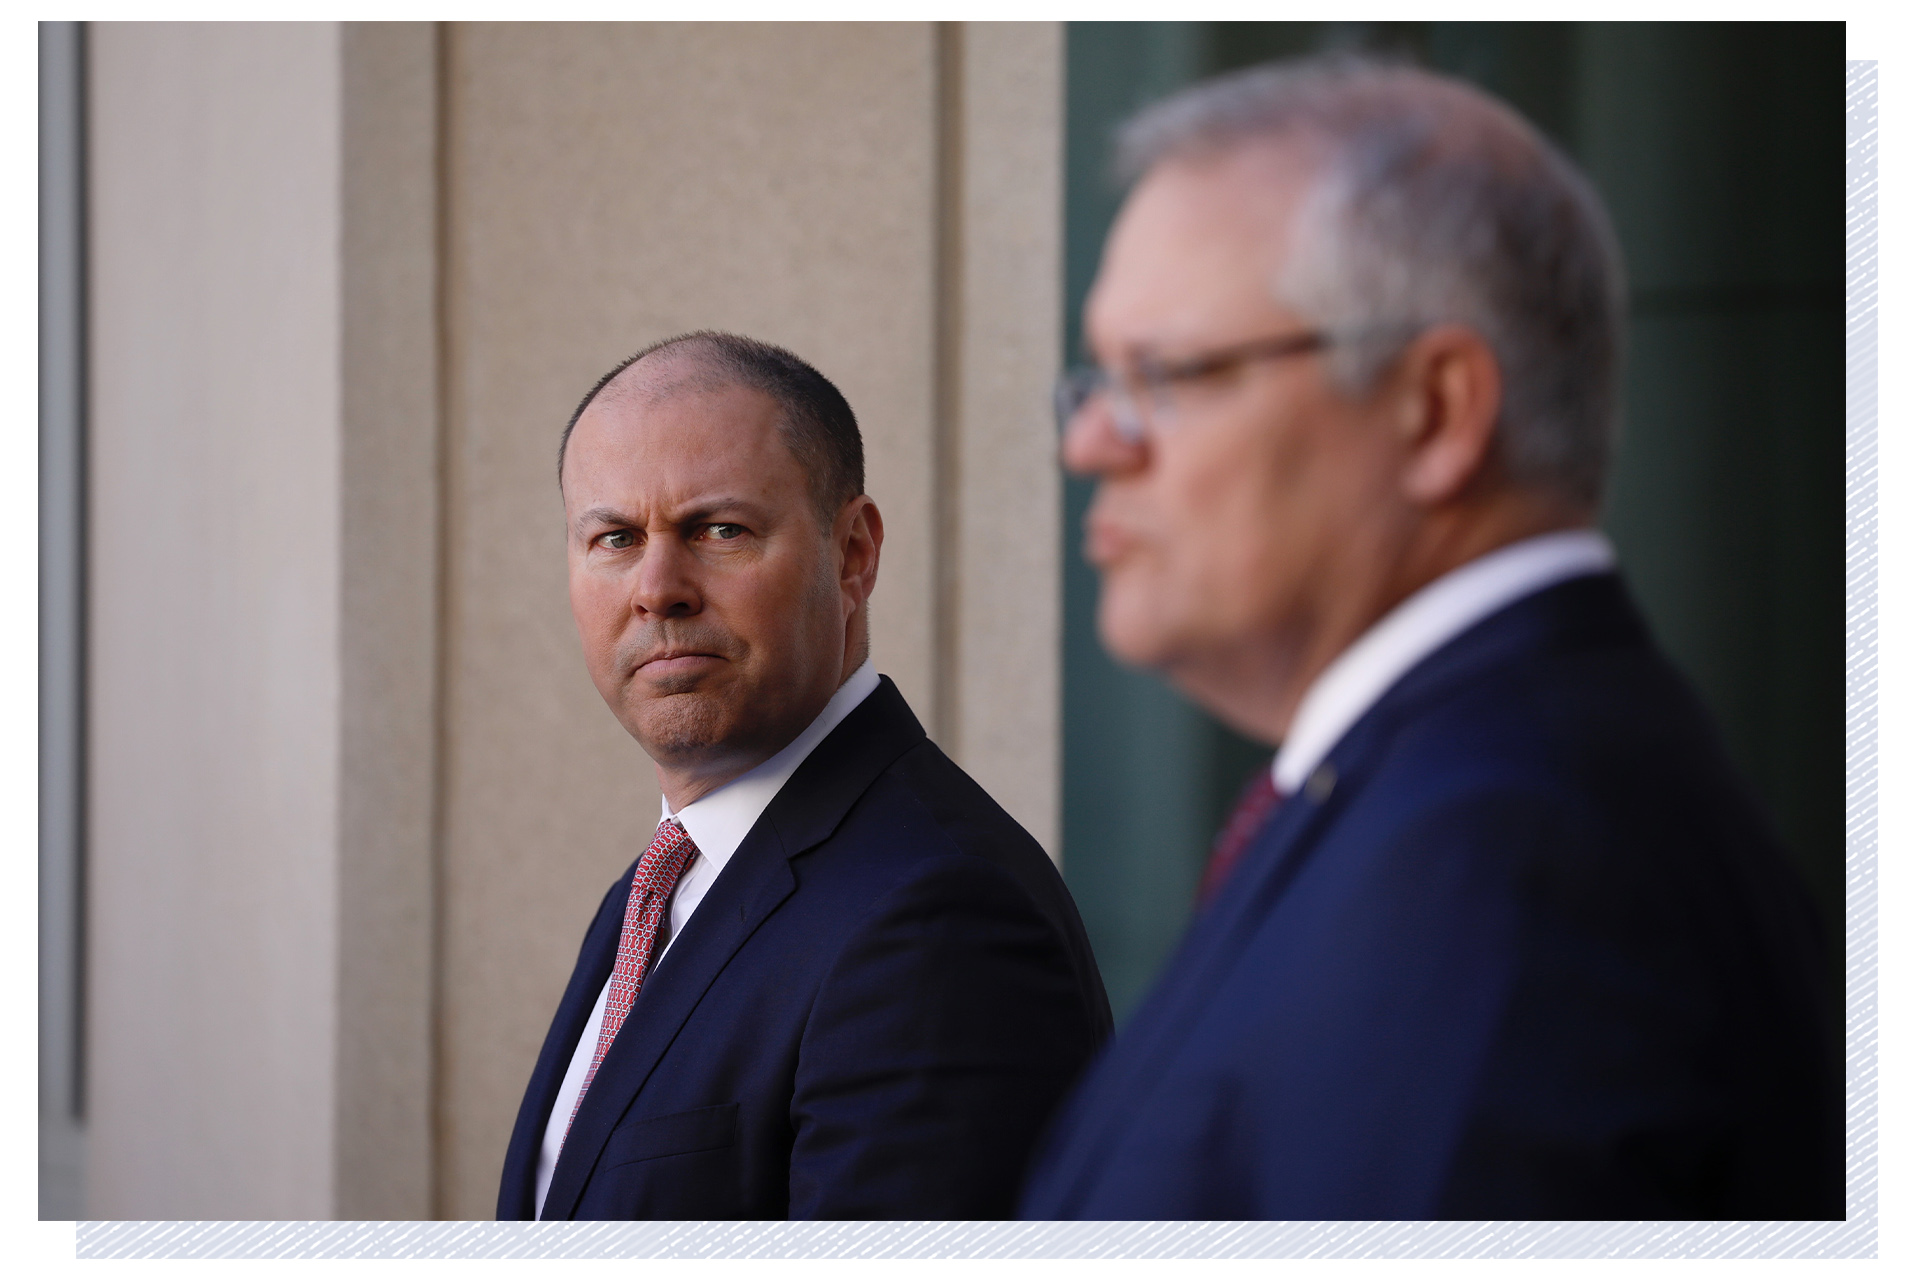 Josh Frydenberg looks across to Scott Morrison as they give a press conference in the Prime Minister's courtyard.